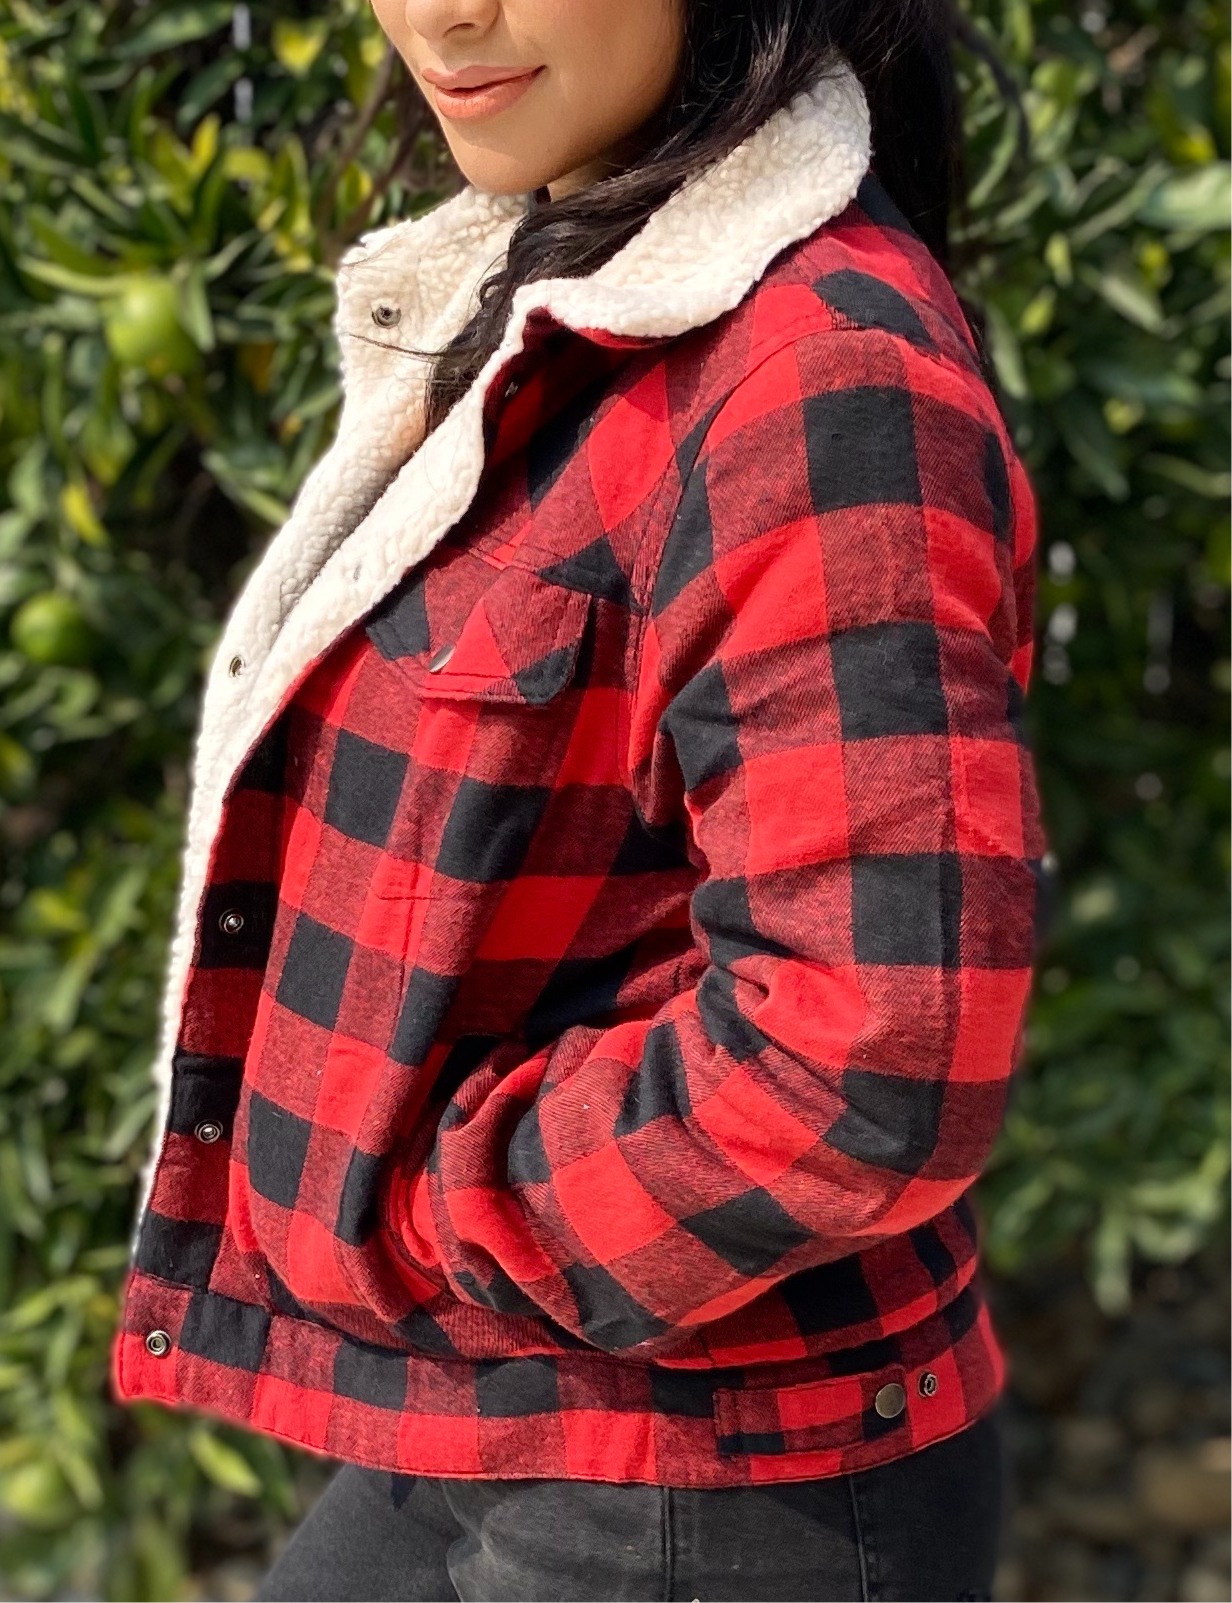 Tahoe Cabin Fever Outdoor Plaid is Print Winter Jacket (red)